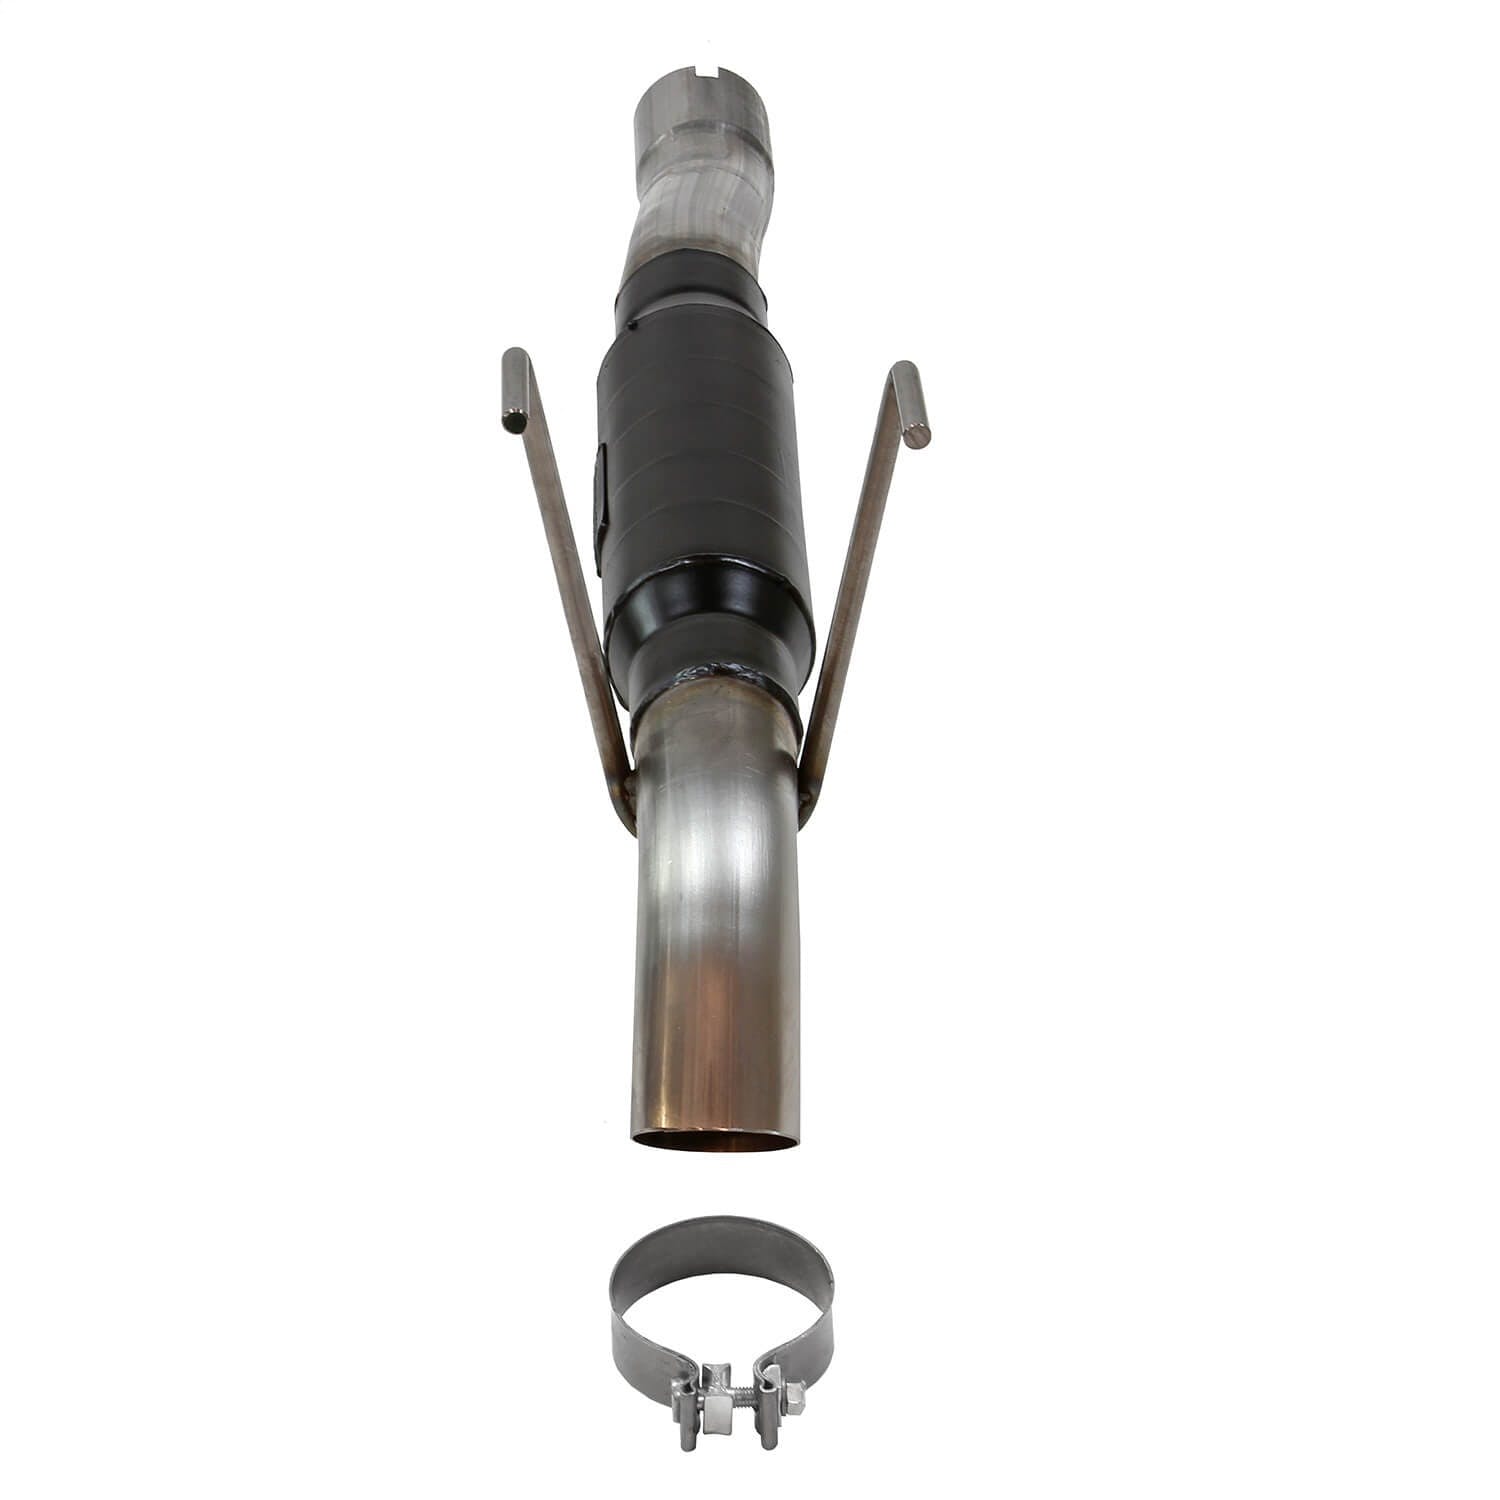 Flowmaster 817963 Outlaw Extreme Cat Back Exhaust System